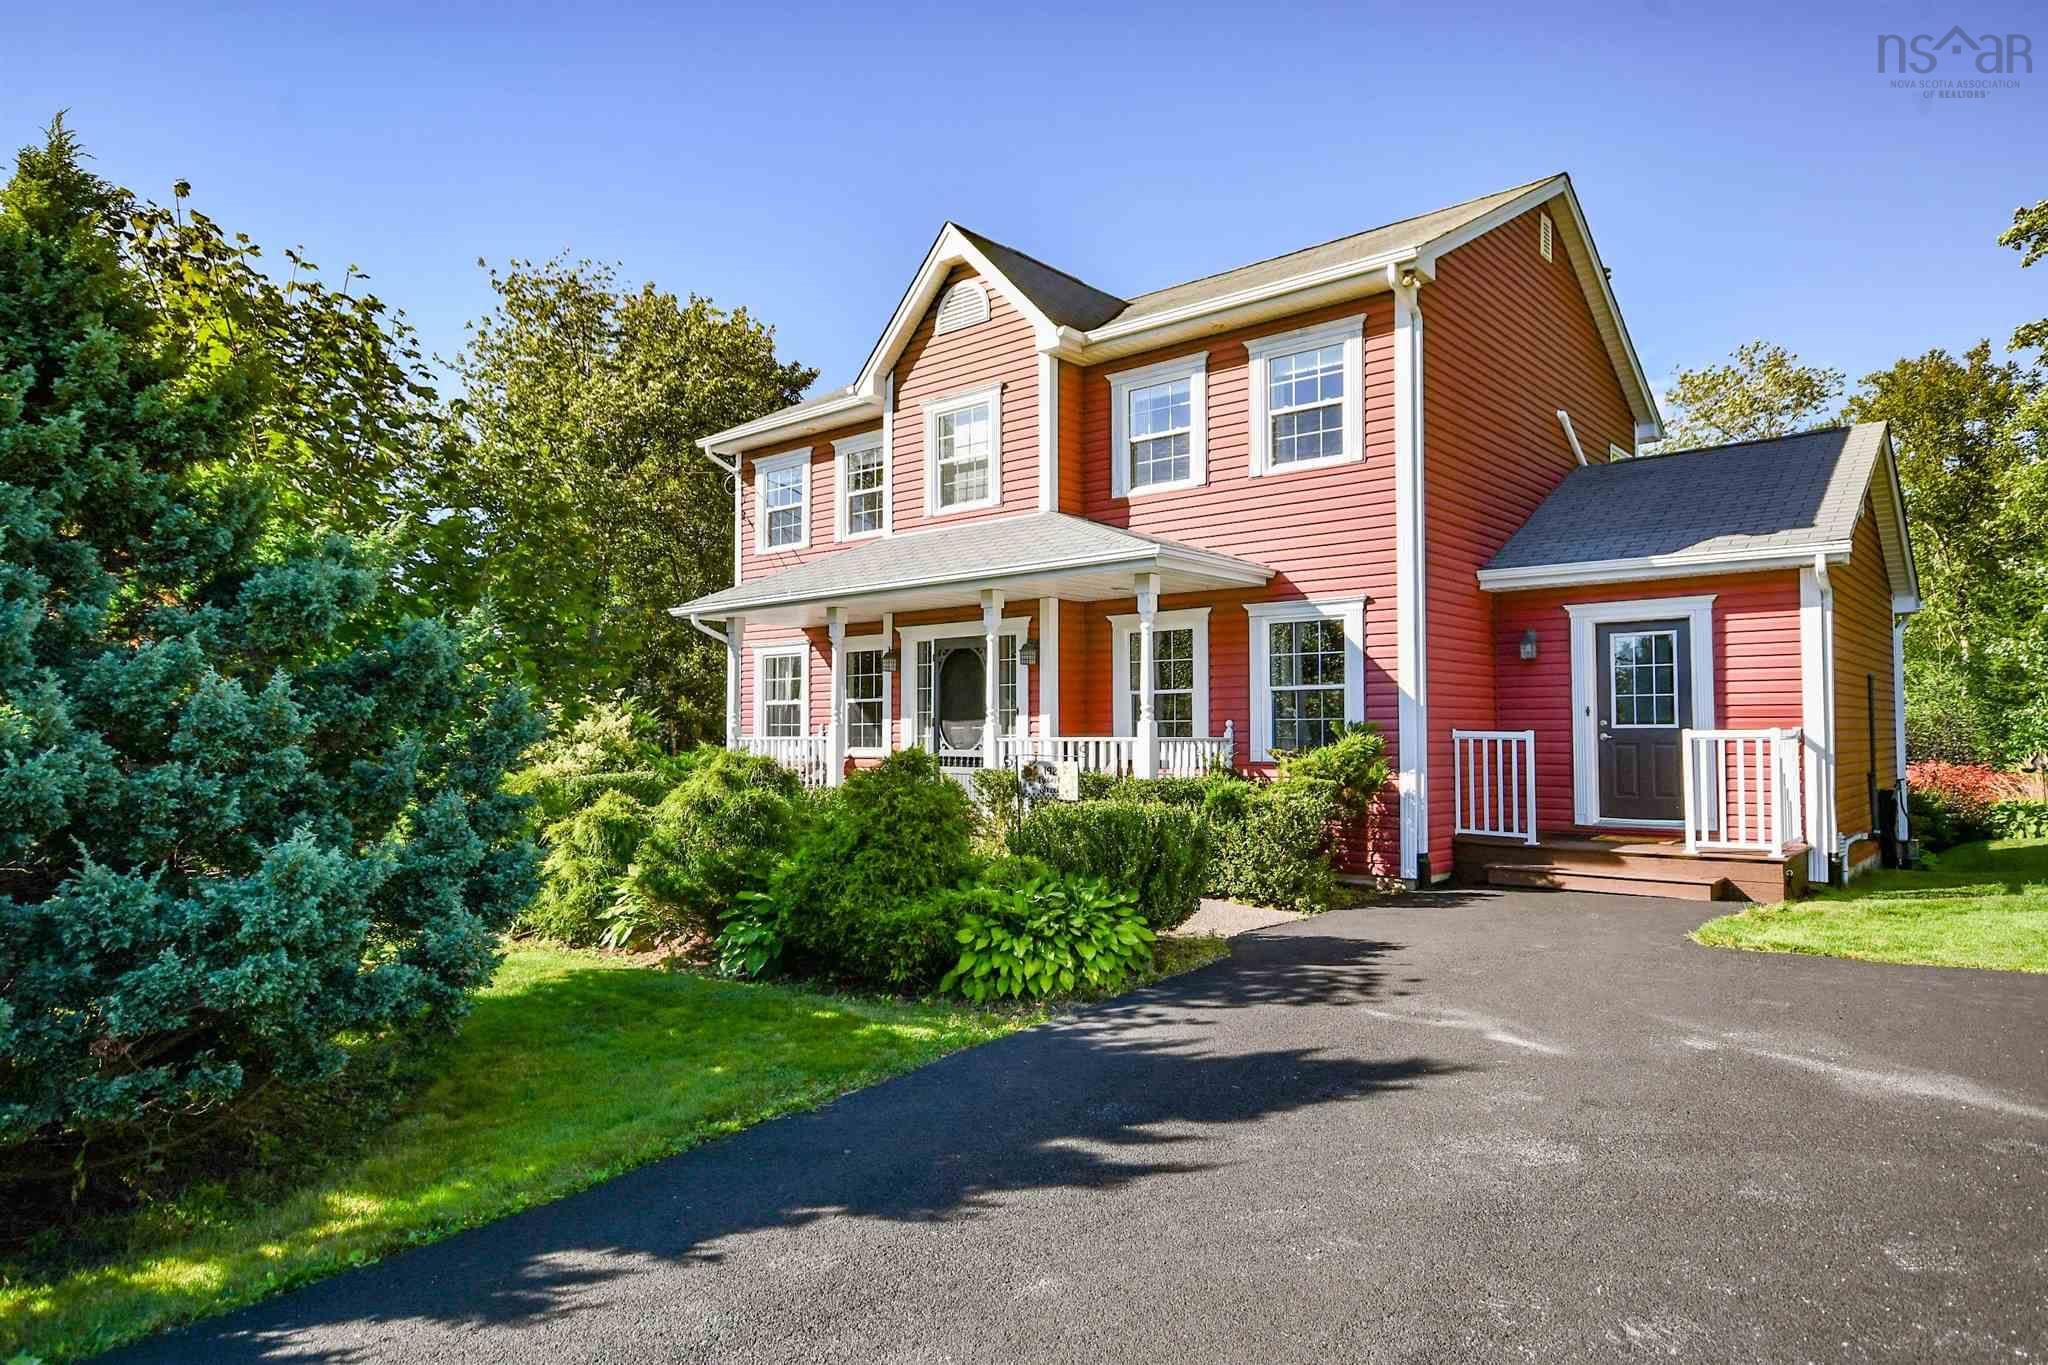 Main Photo: 192 Robert Street in Fall River: 30-Waverley, Fall River, Oakfield Residential for sale (Halifax-Dartmouth)  : MLS®# 202123989